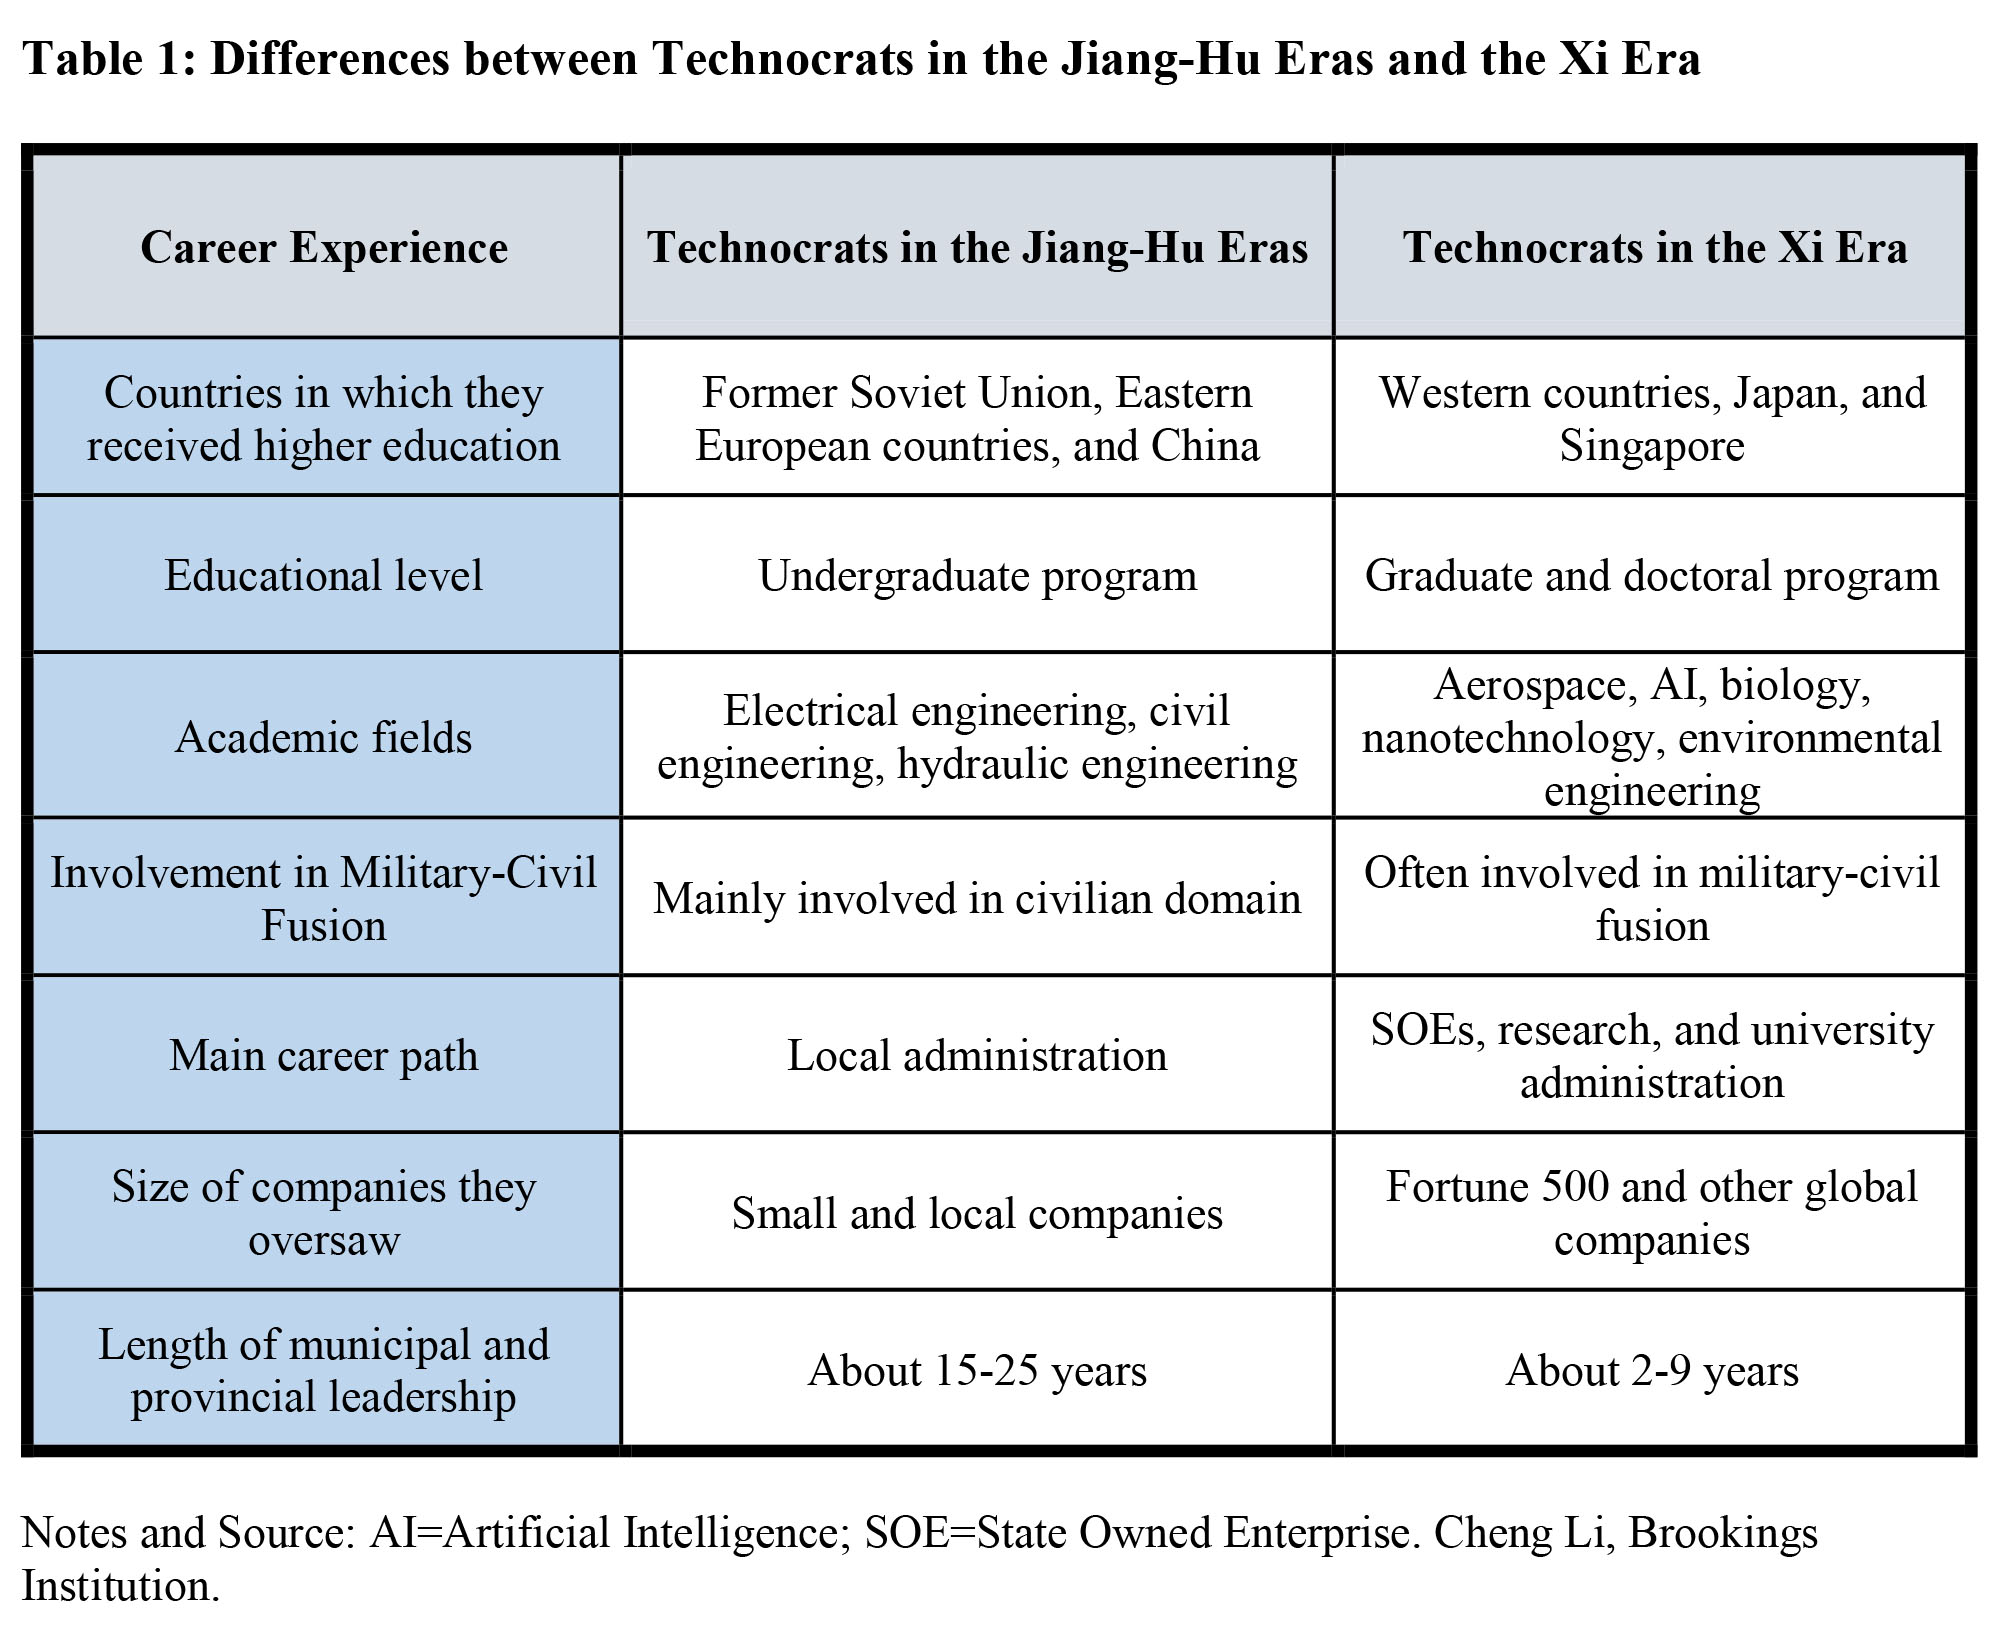 RR18 Table 1 Differences between technocrats Final.jpg